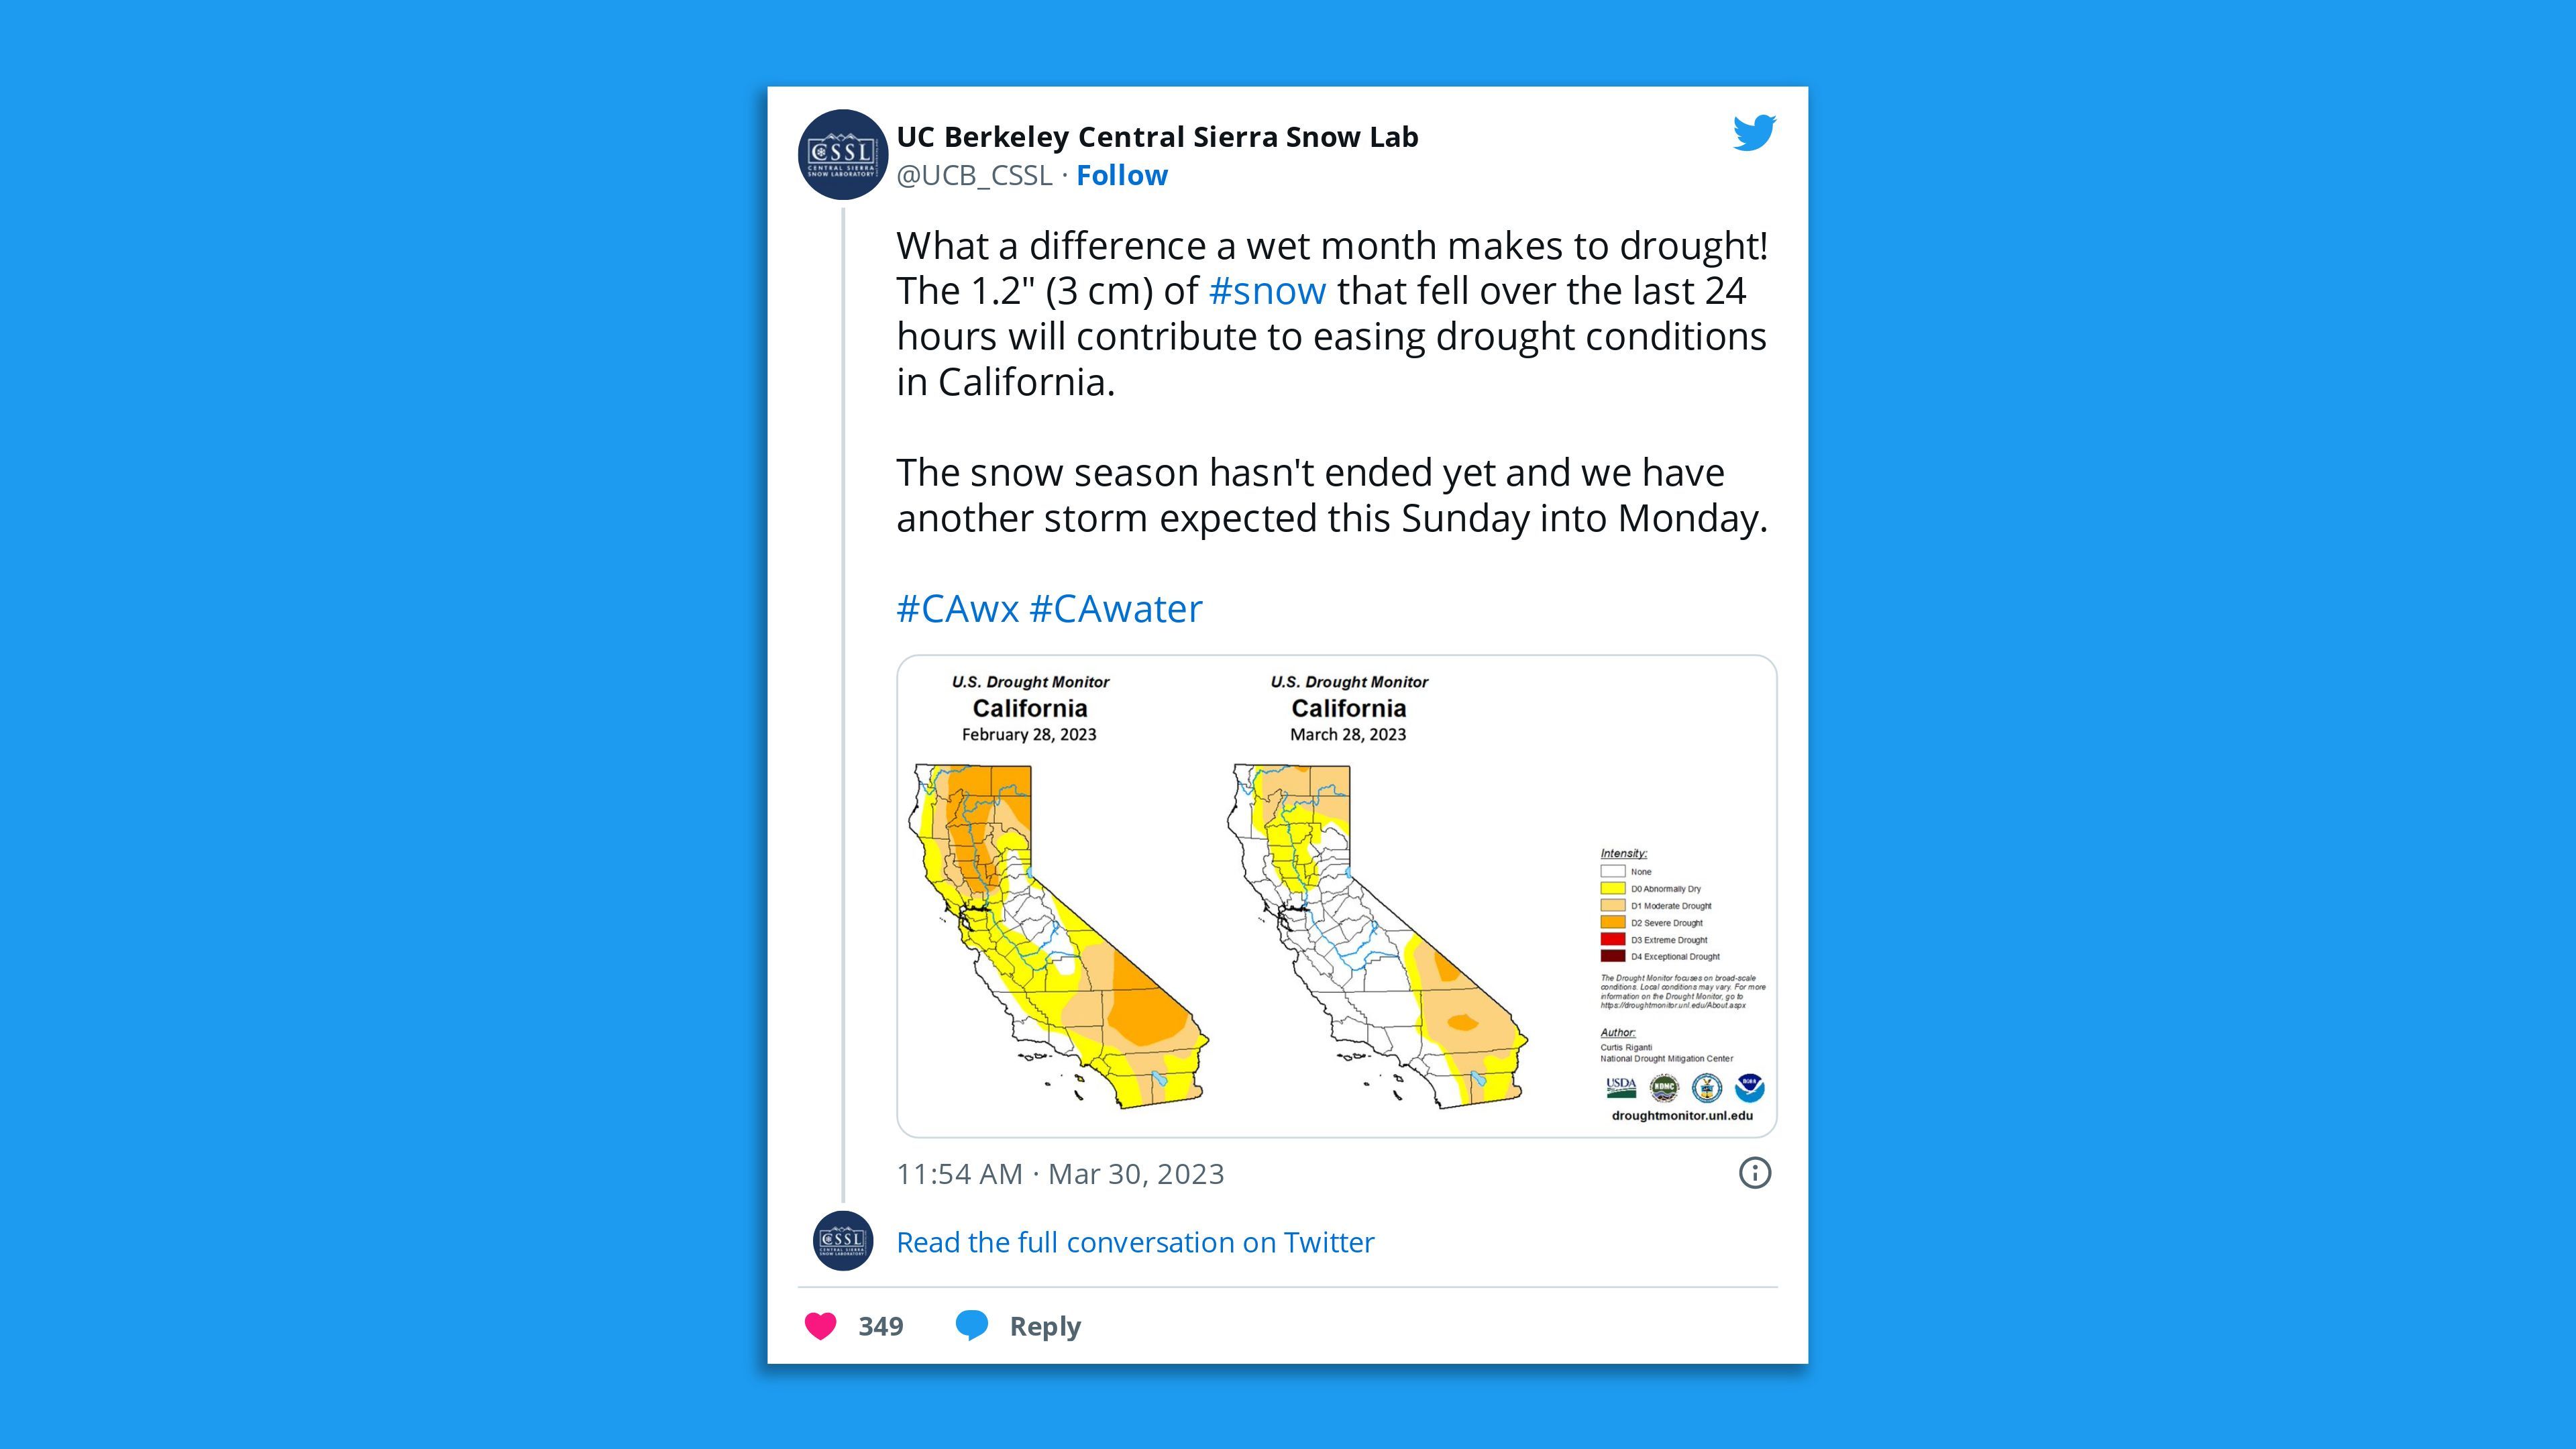 A screenshot of a UC Berkeley Central Sierra Snow Lab tweet saying, "What a difference a wet month makes to drought! The 1.2" (3 cm) of #snow that fell over the last 24 hours will contribute to easing drought conditions in California.  The snow season hasn't ended yet and we have another storm expected this Sunday into Monday. "